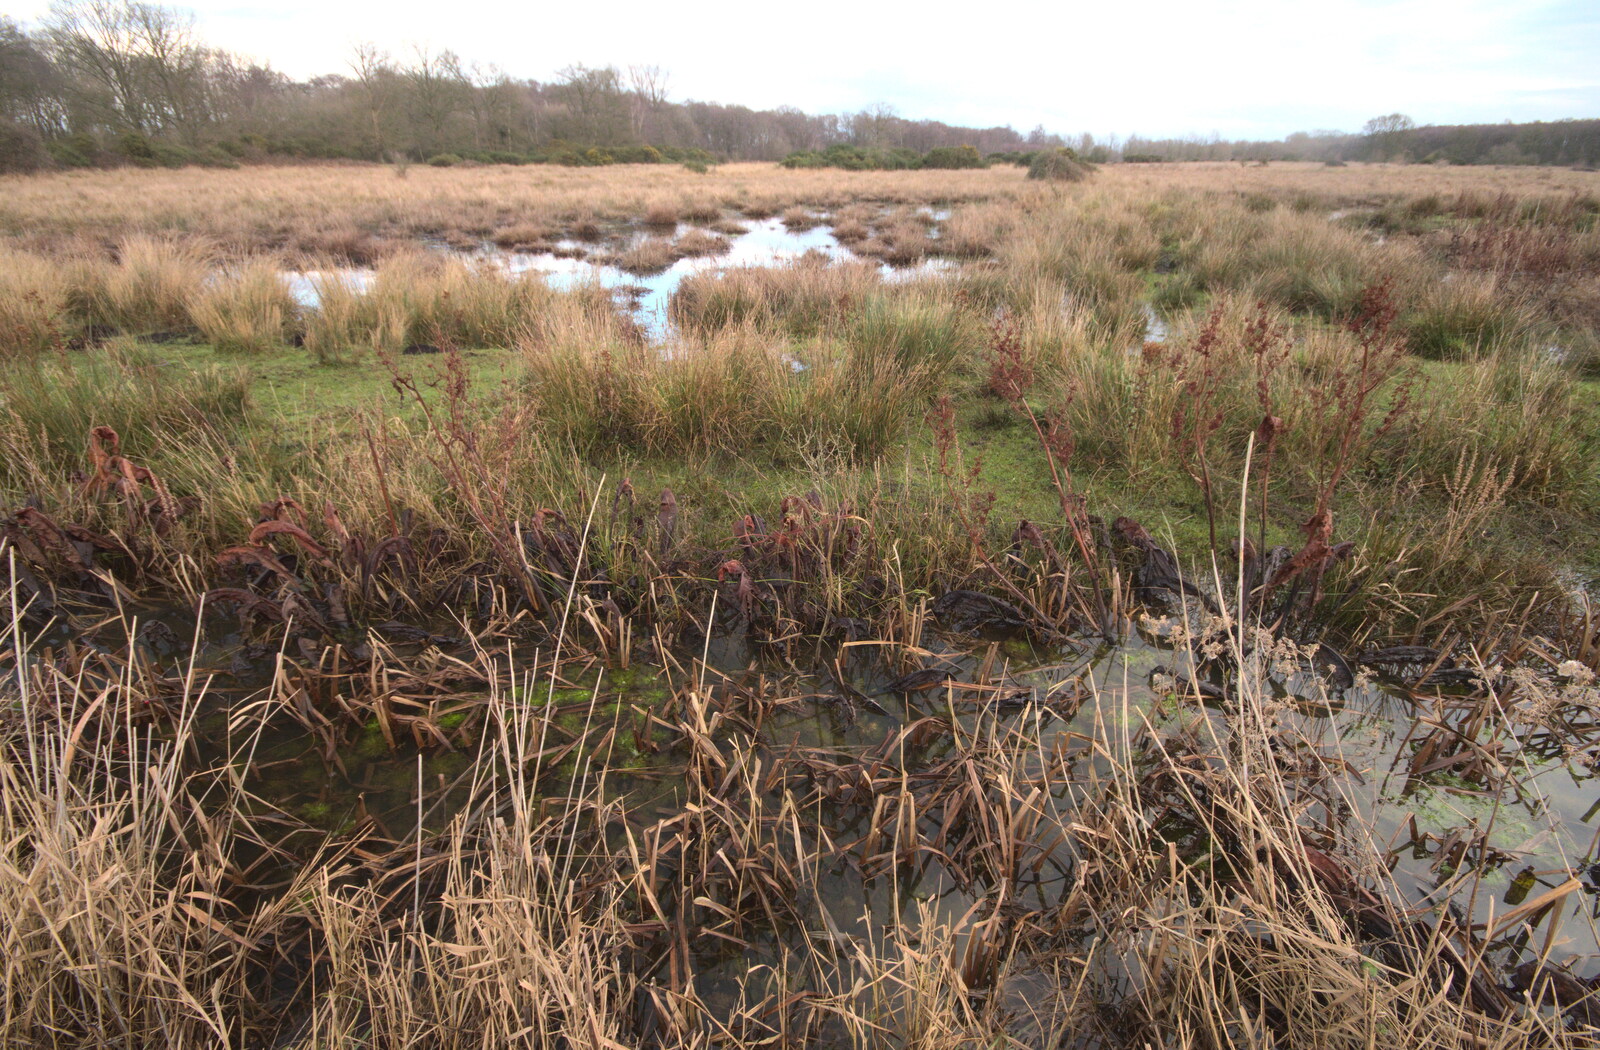 Thick dead grasses in the fen from A Walk Around Redgrave and Lopham Fen, Redgrave, Suffolk - 3rd January 2021